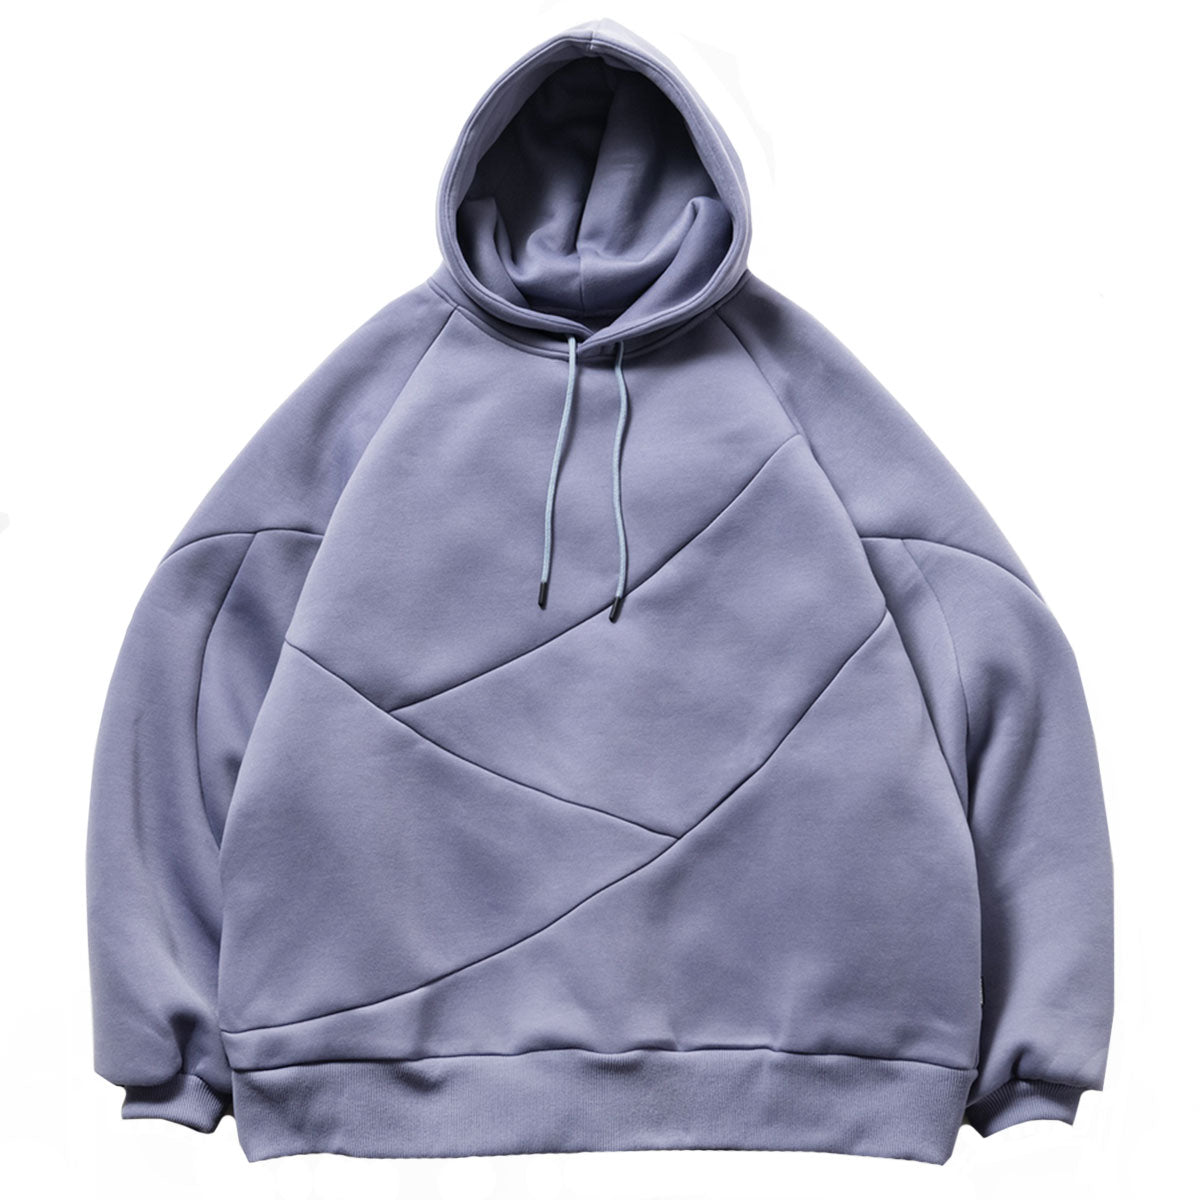 SPLICE SMOOTH HOODIE - Why are you here?